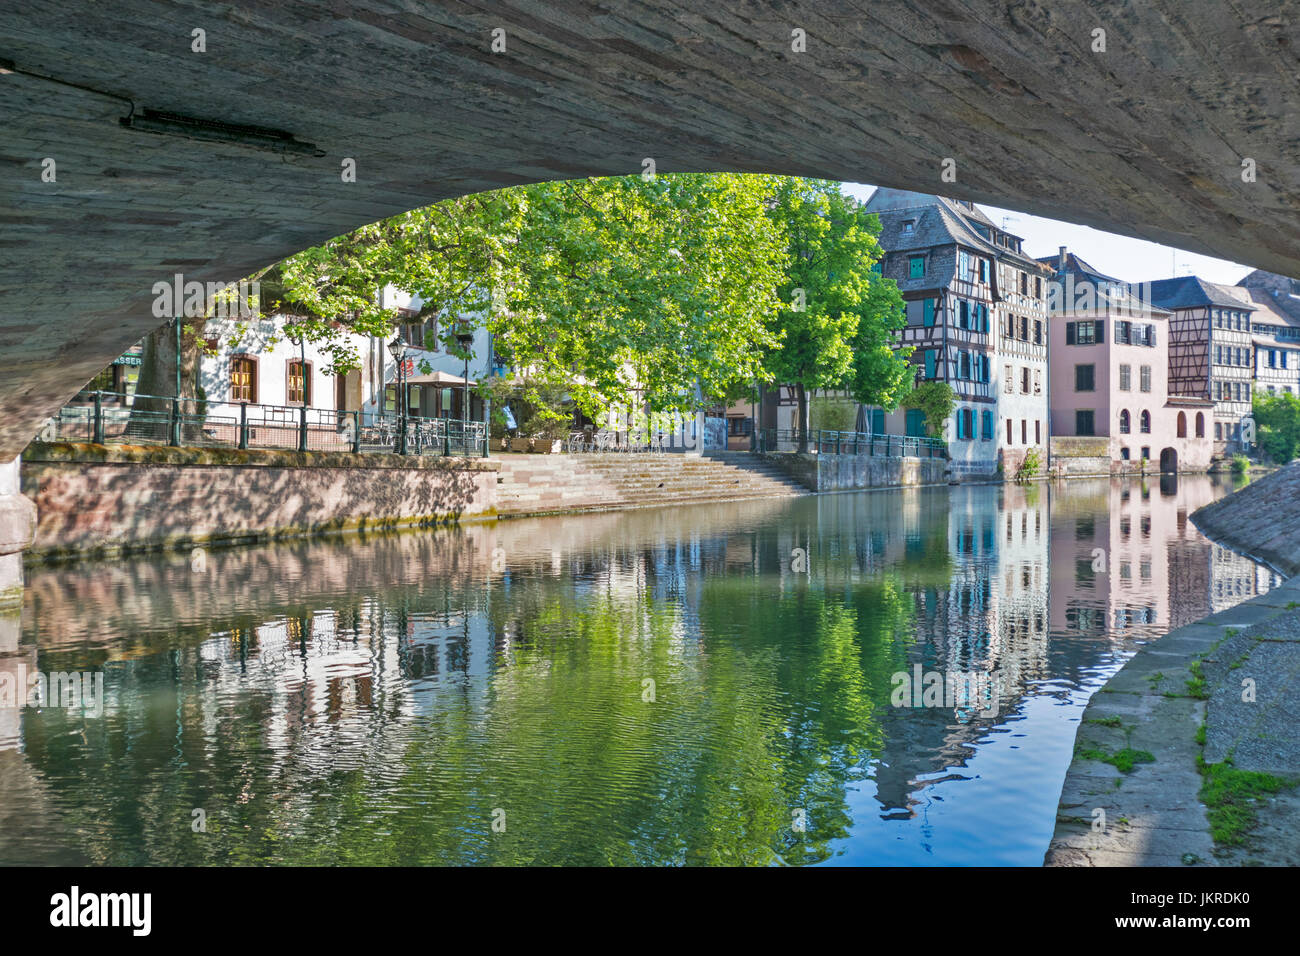 STRASBOURG THE PETITE FRANCE DISTRICT AND RIVER L'ILL VIEW UNDER BRIDGE OVER ONE OF THE RIVER CHANNELS AND PASTEL COLOURED HOUSES Stock Photo